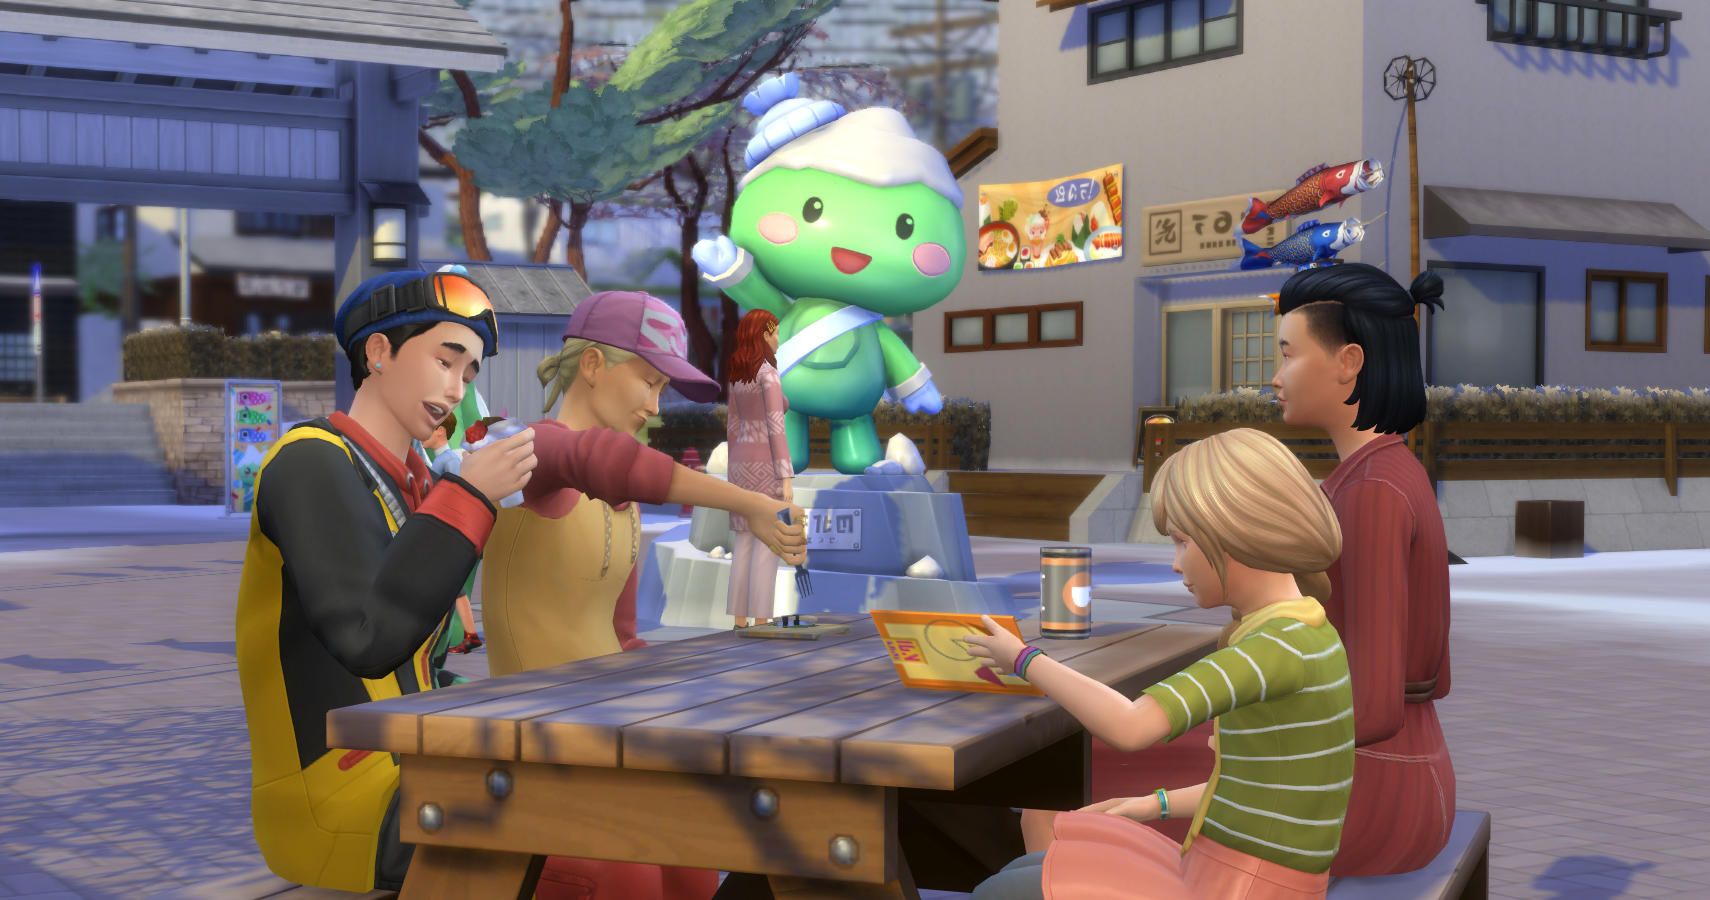 The Sims 4 Snowy Escape Review A Return To Greatness